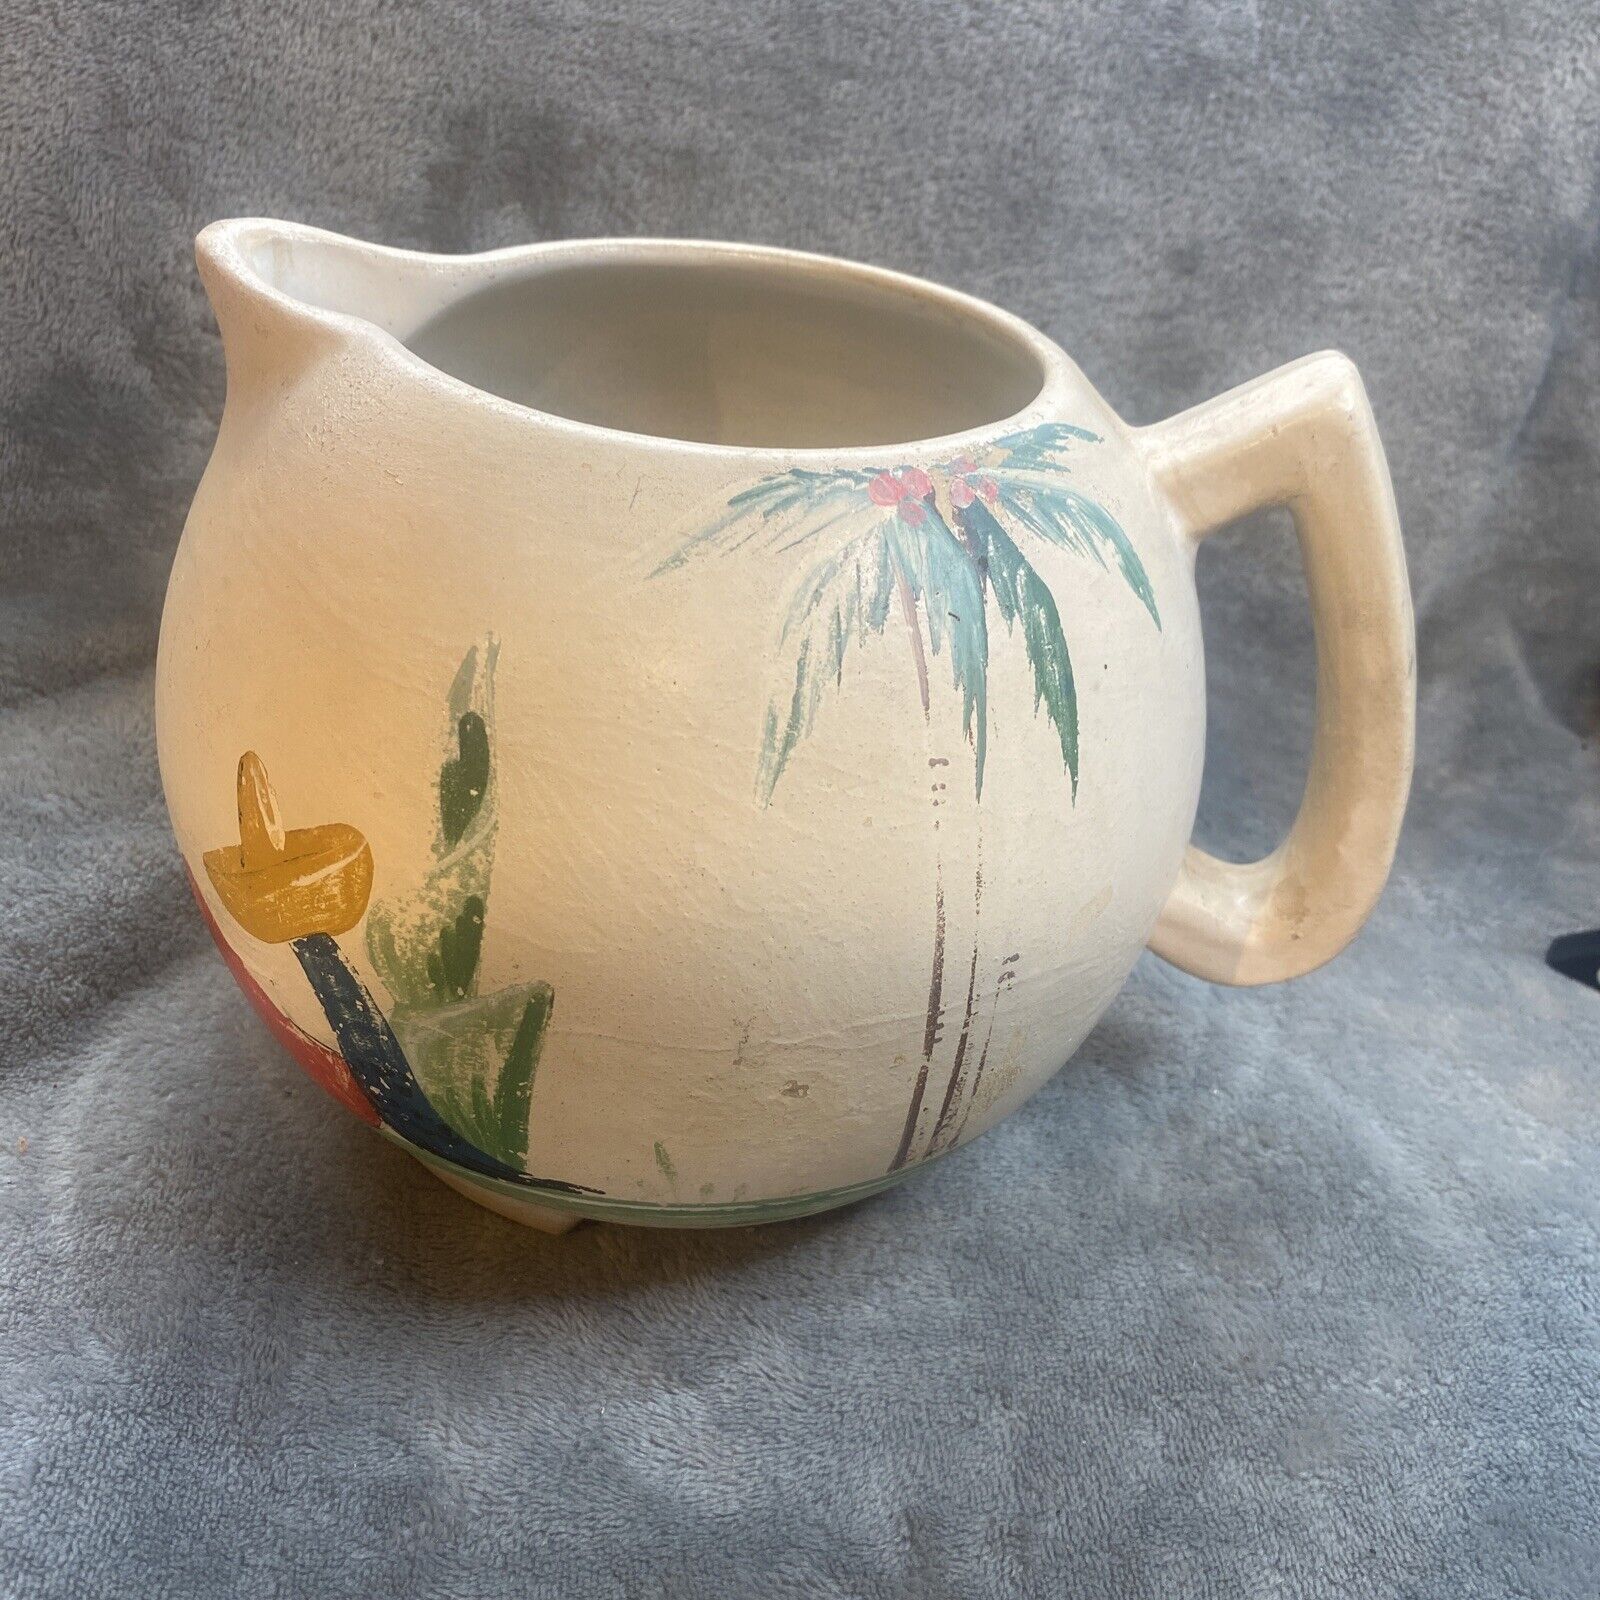 Vintage RANSBURG Stoneware POTTERY PITCHER Mexico scene handpainted